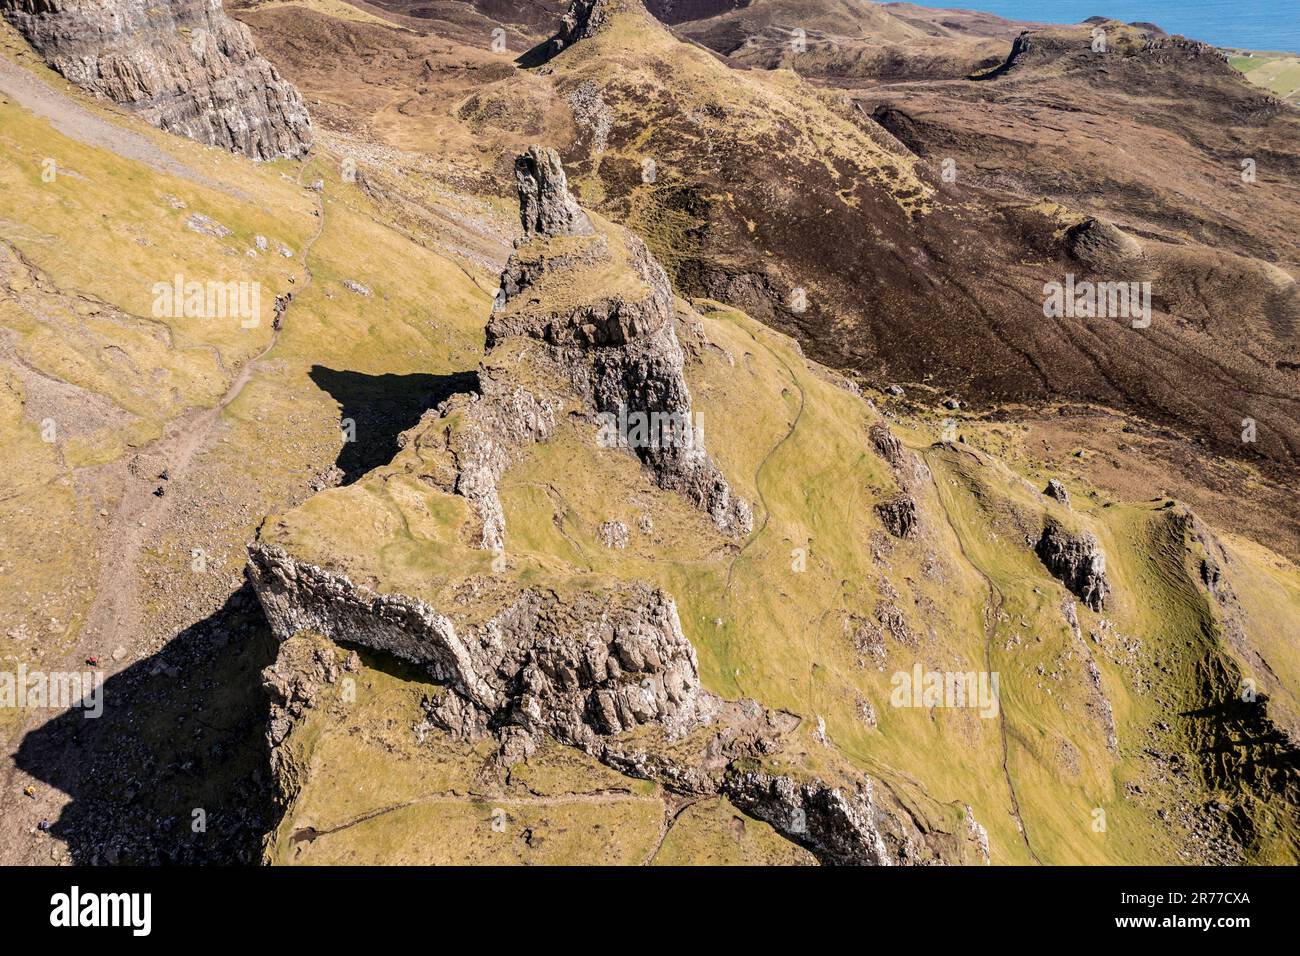 Aerial view of the Quiraing rock formation 'the prison', Trotternish peninsula, Isle of Skye, Scotland, UK Stock Photo